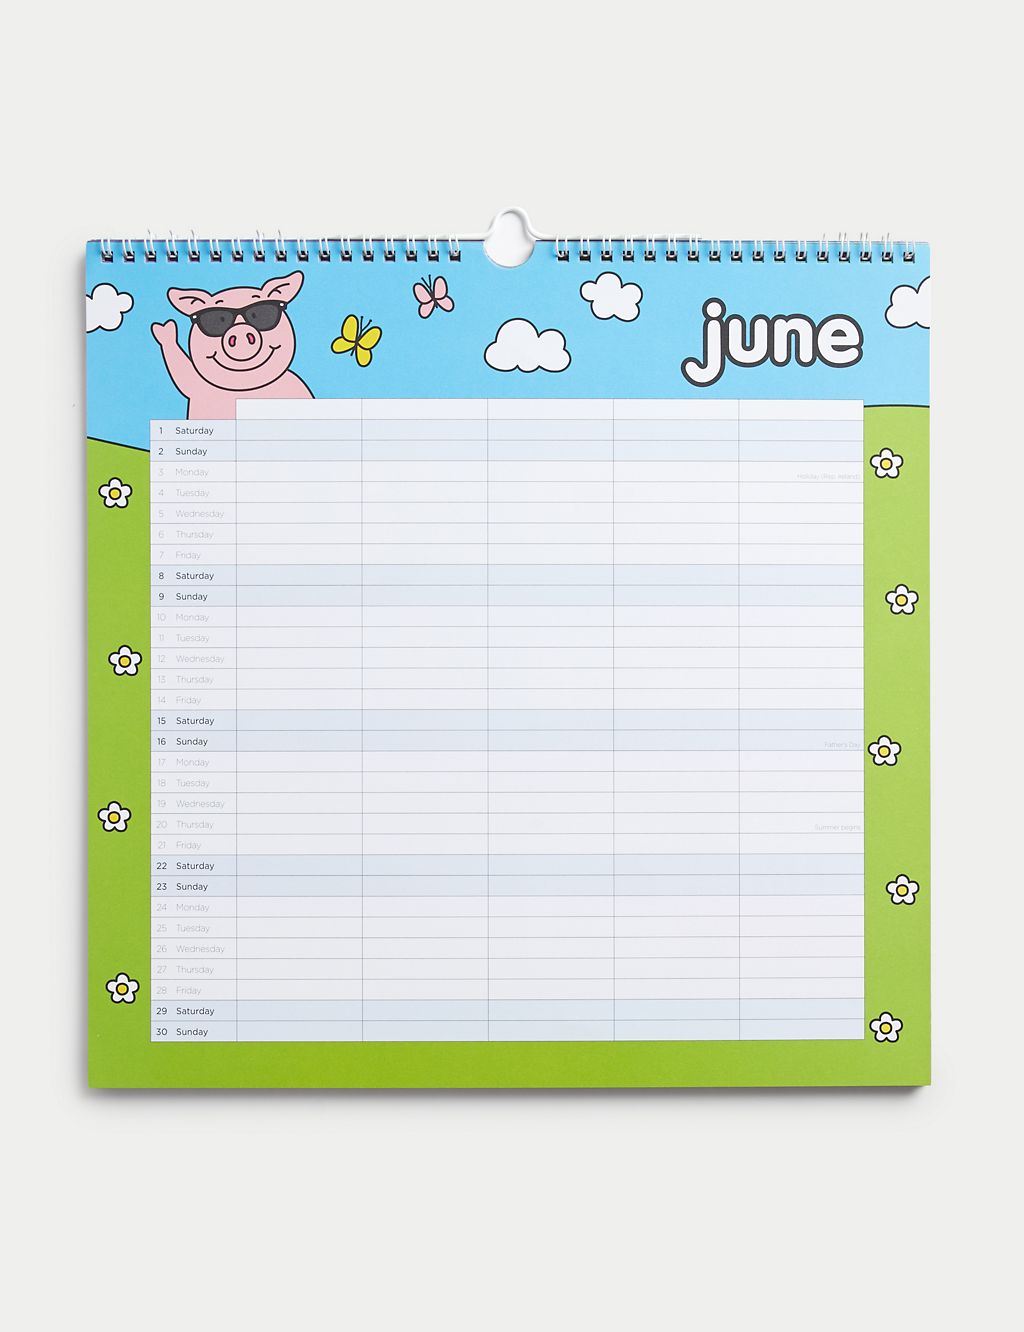 2024 Calendar & Family Organiser - Percy Pig™ with Stickers 1 of 5